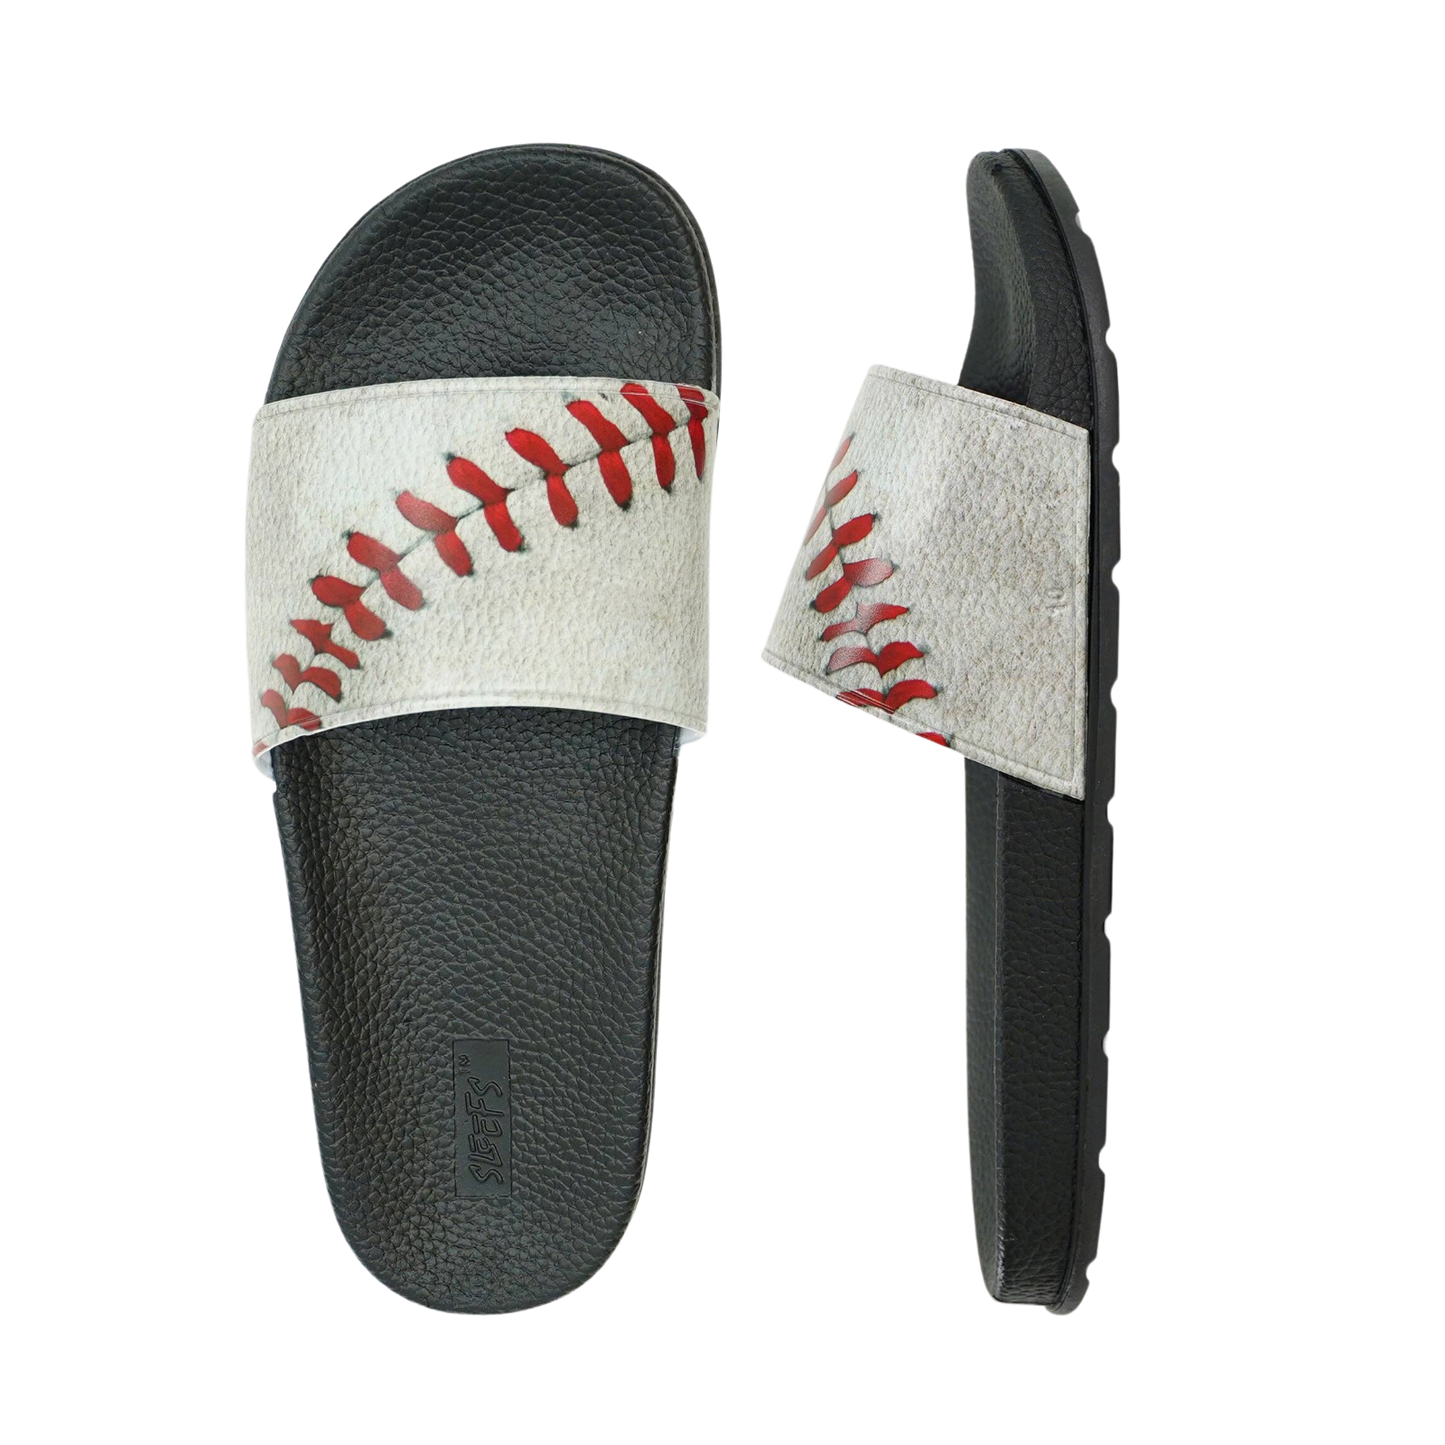 Old Baseball Slides Shoes by The Rustic Redbud | The Rustic Redbud Boutique